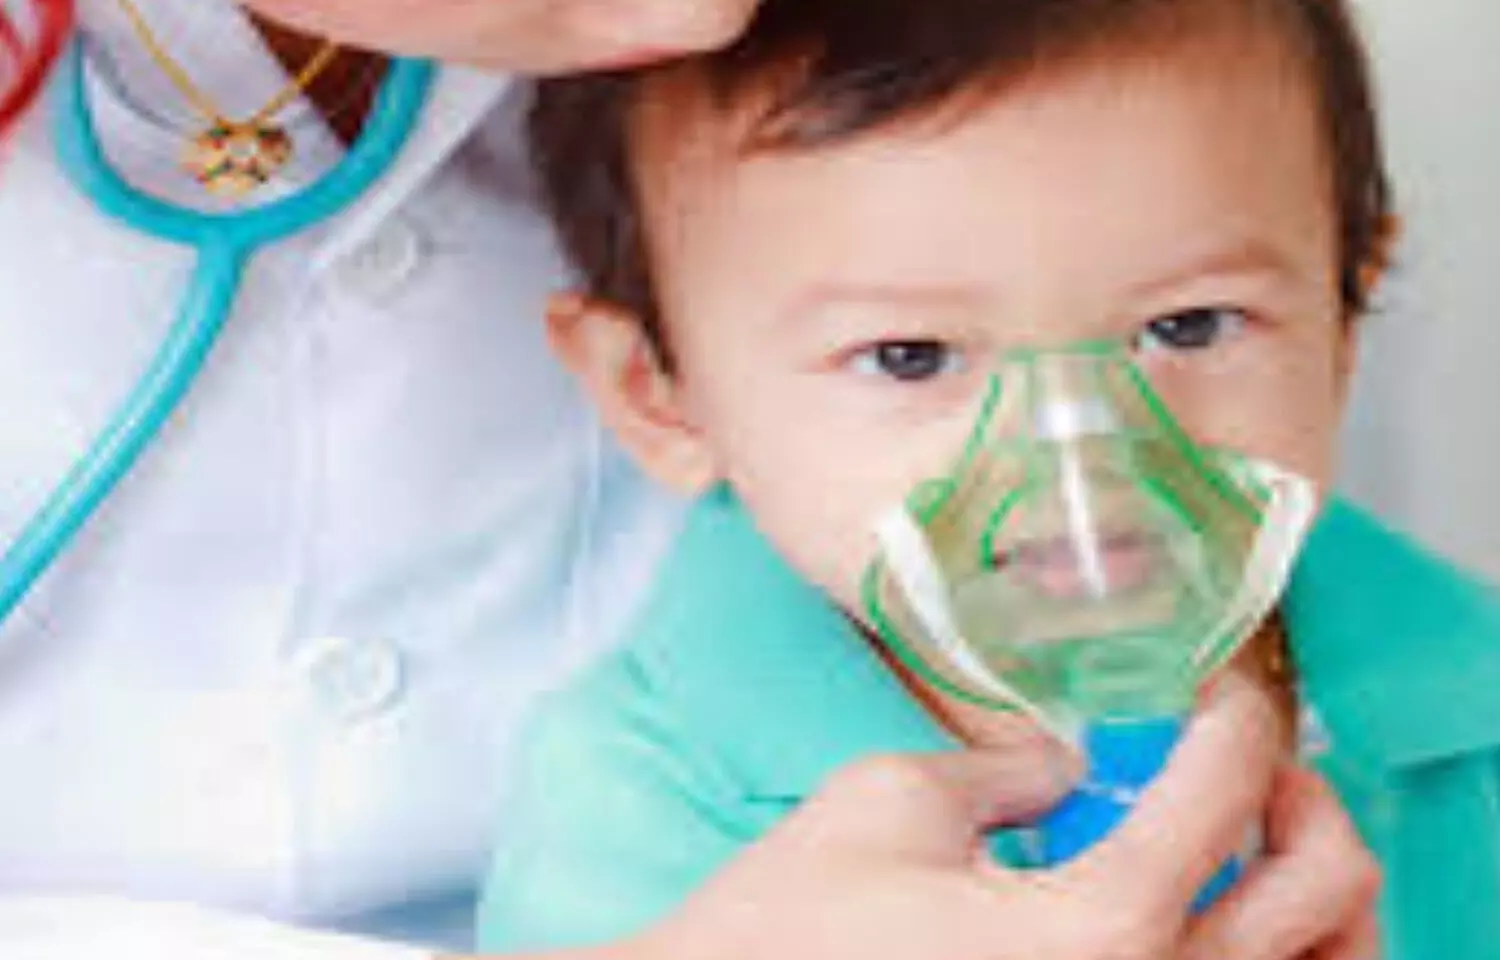 Bronchodilators use decreased in bronchiolitis in infants, abiding by AAP recommendations